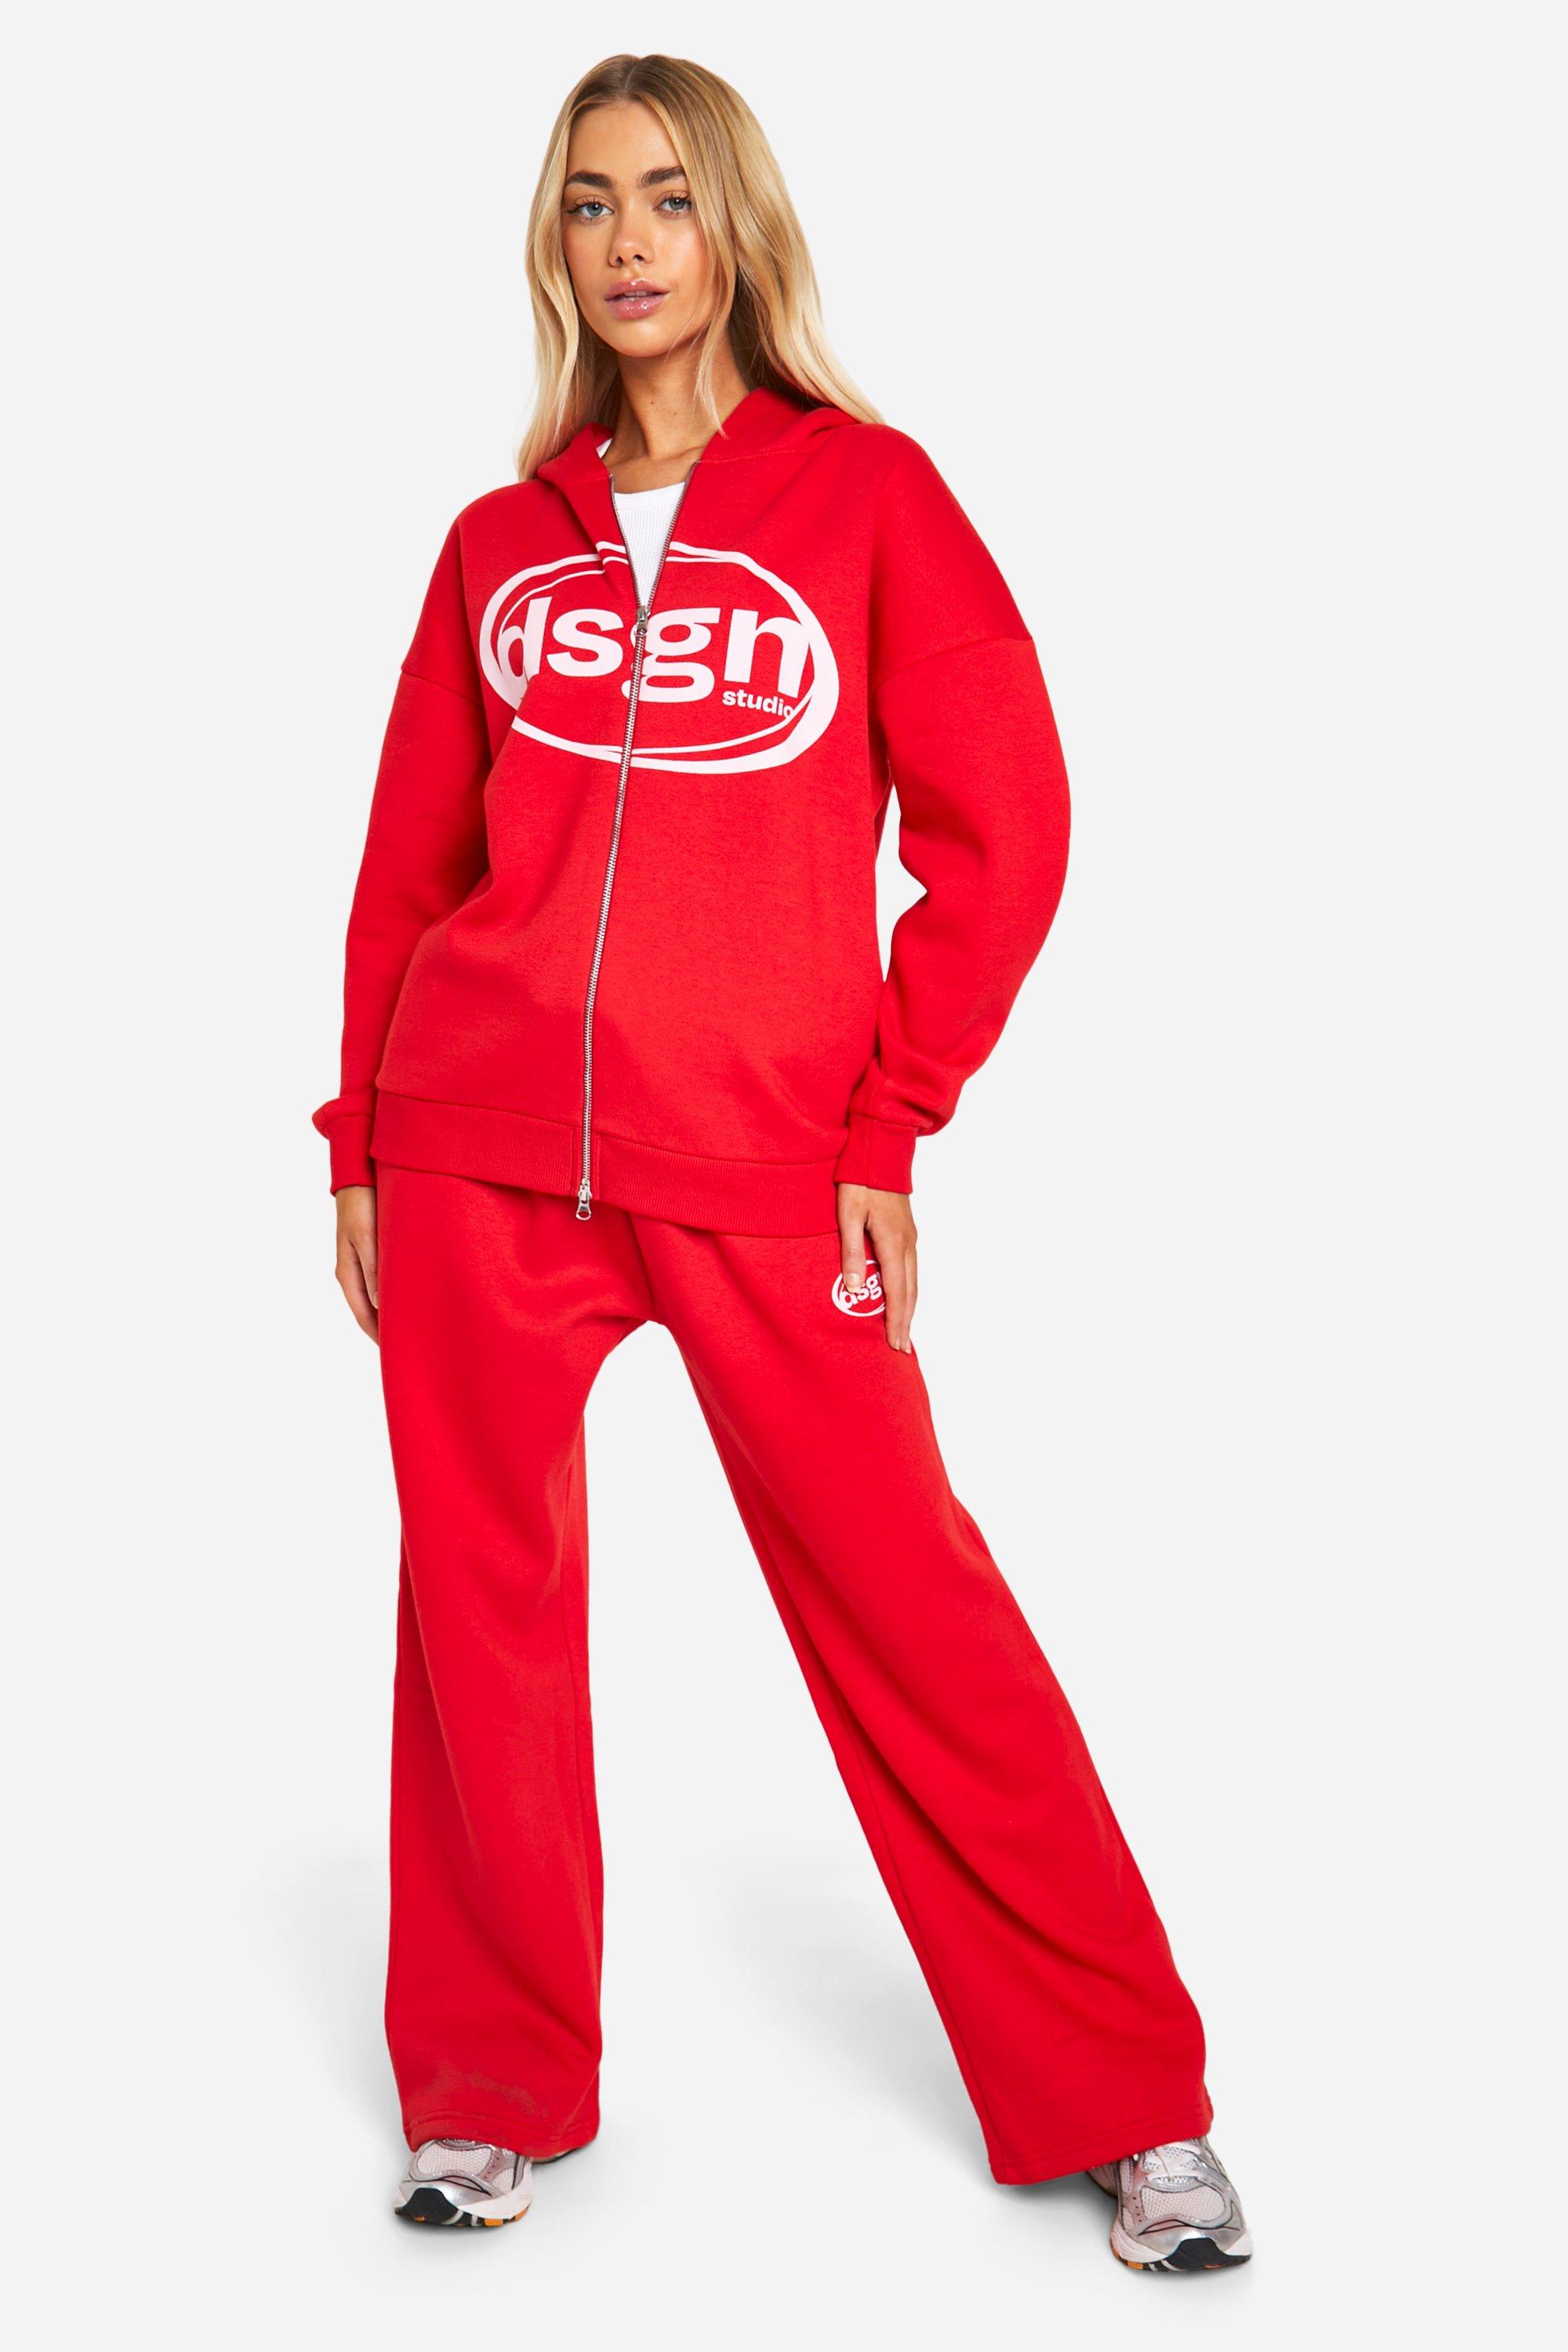 Image of Dsgn Studio Oval Print Cuffed Oversized Jogger, Rosso